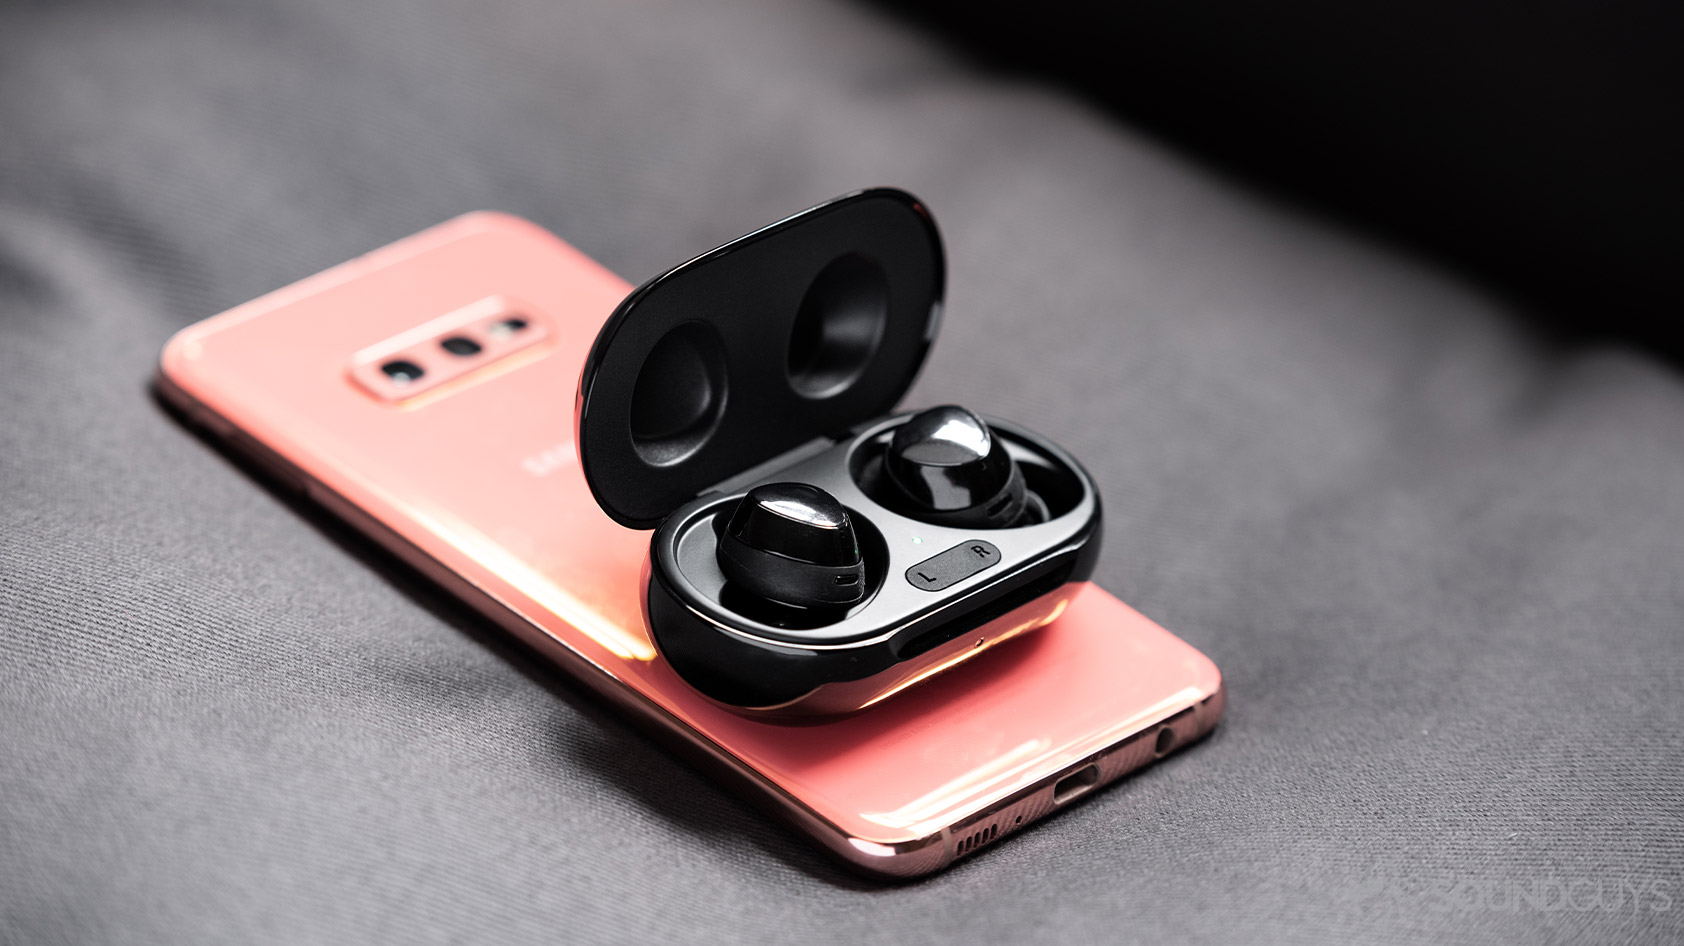 https://www.androidauthority.com/samsung-galaxy-buds-plus-review-1088322/